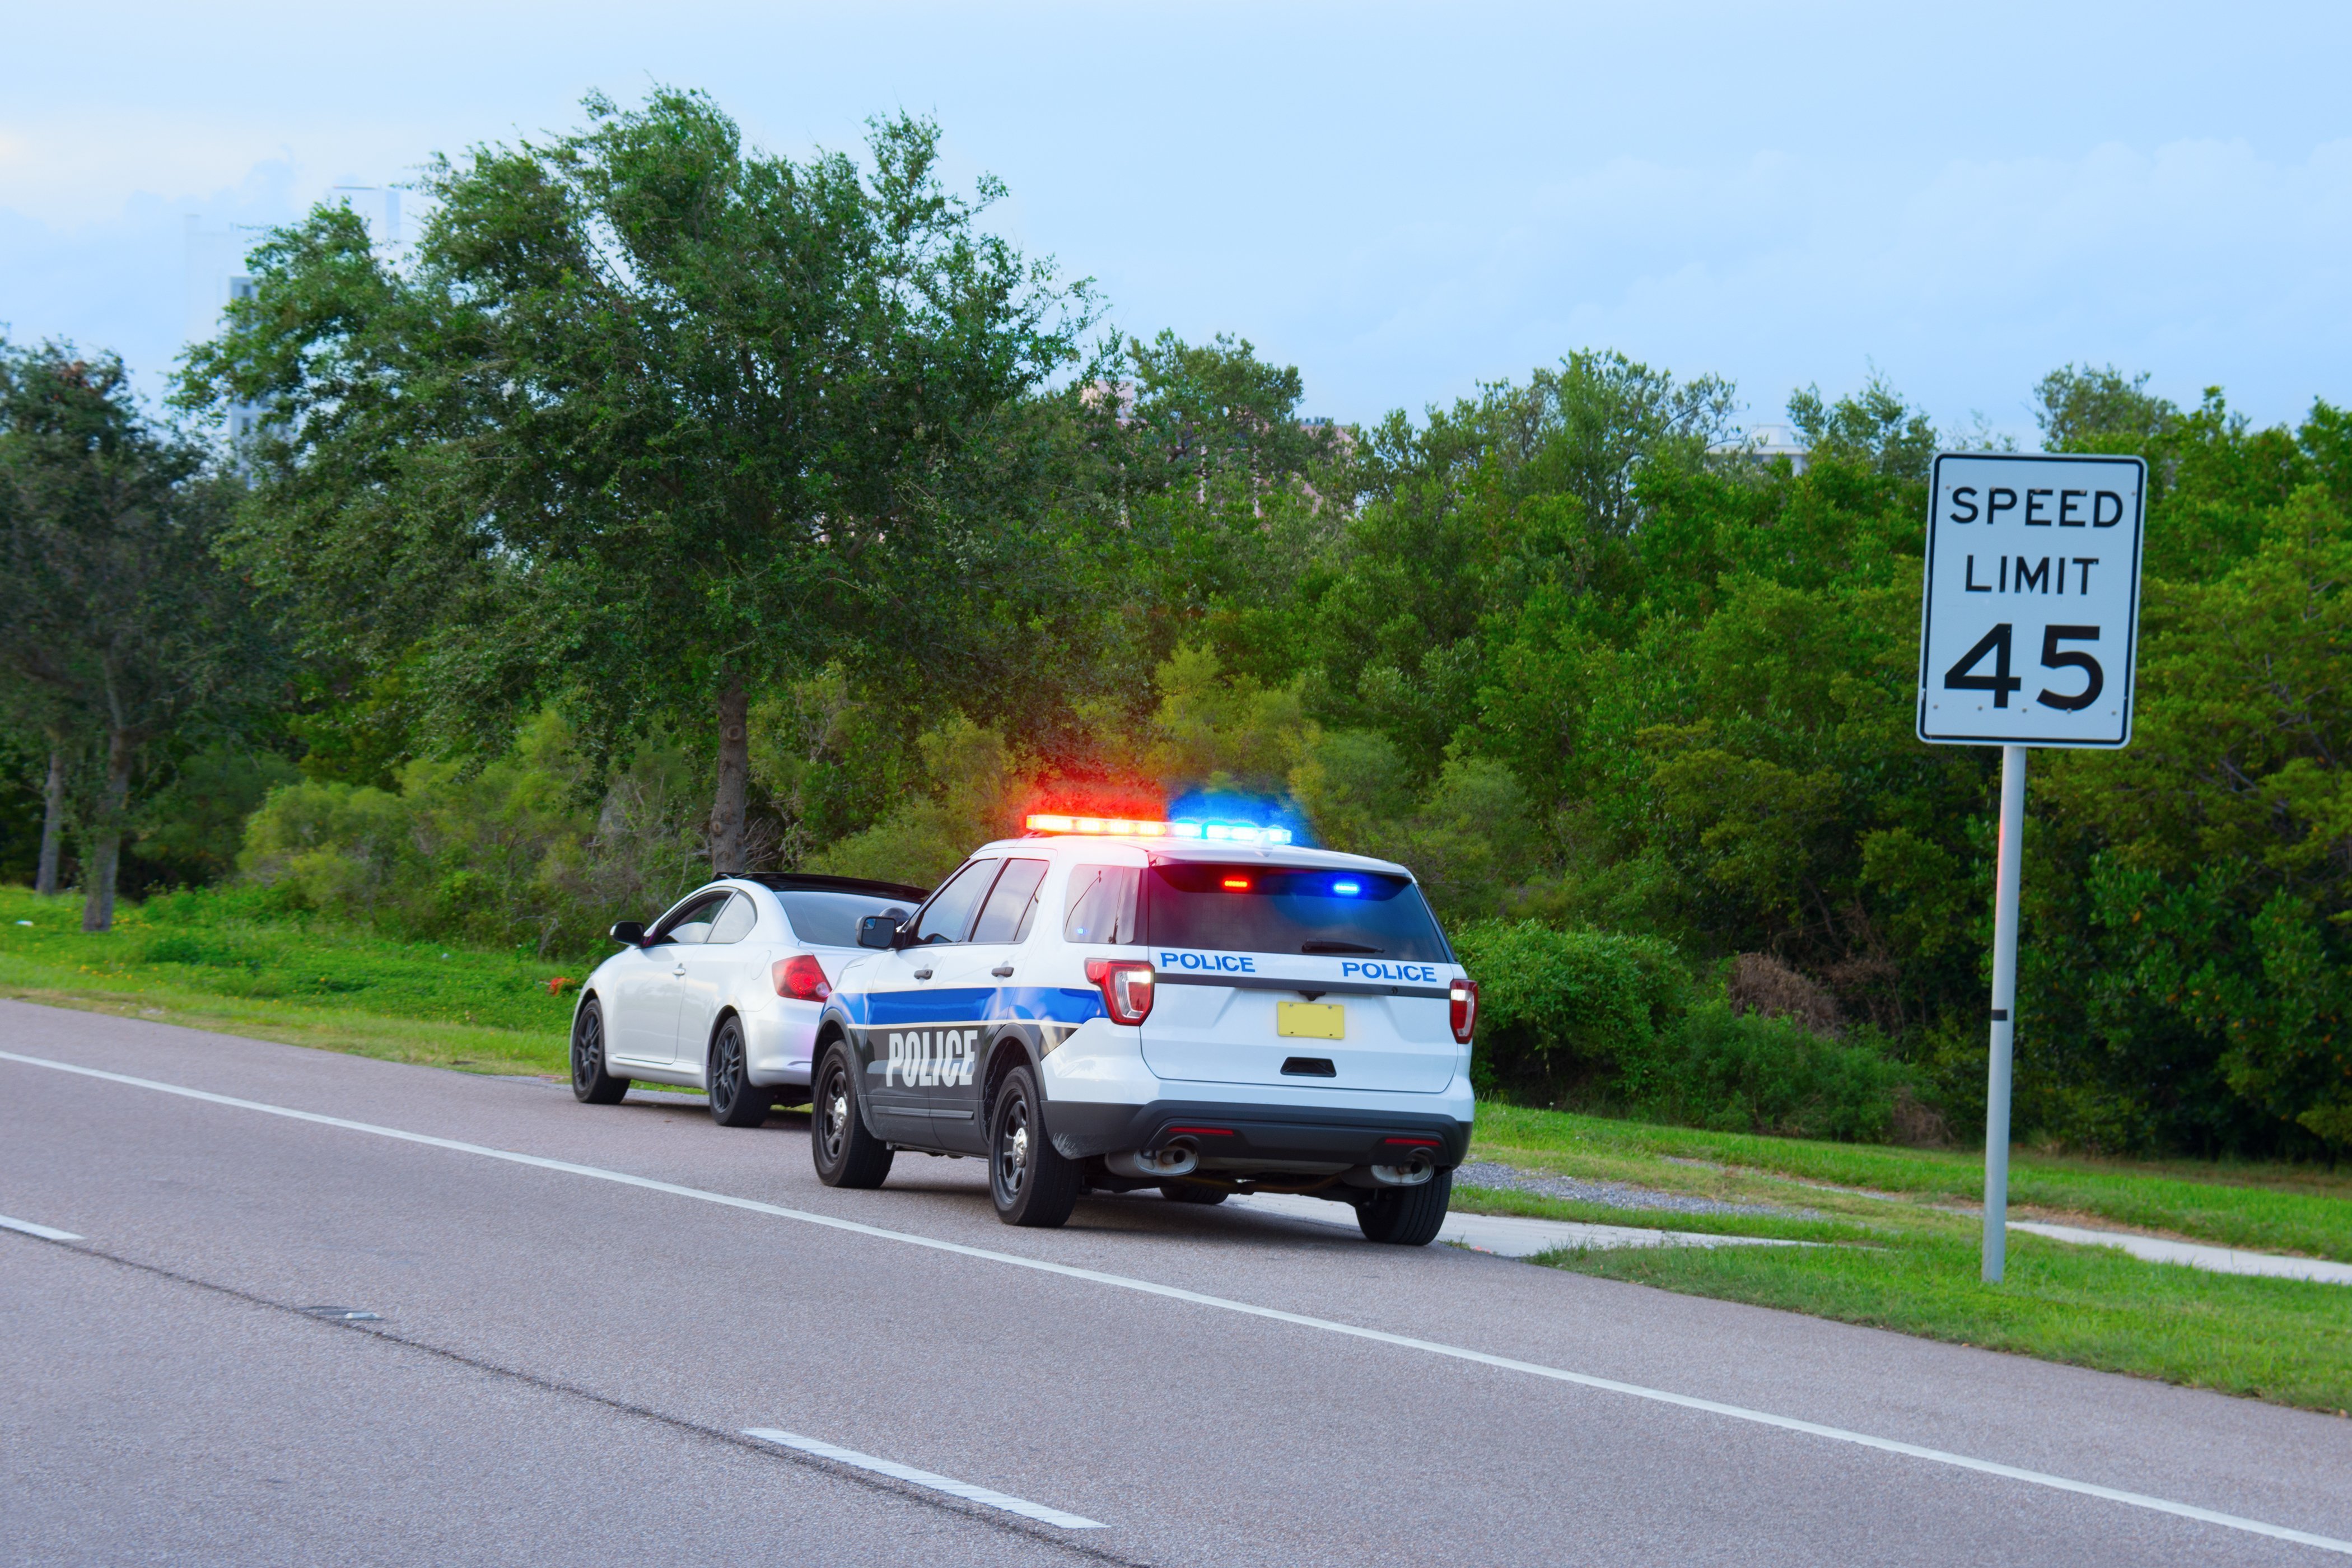 Police cars driving down a road | Photo: Shutterstock